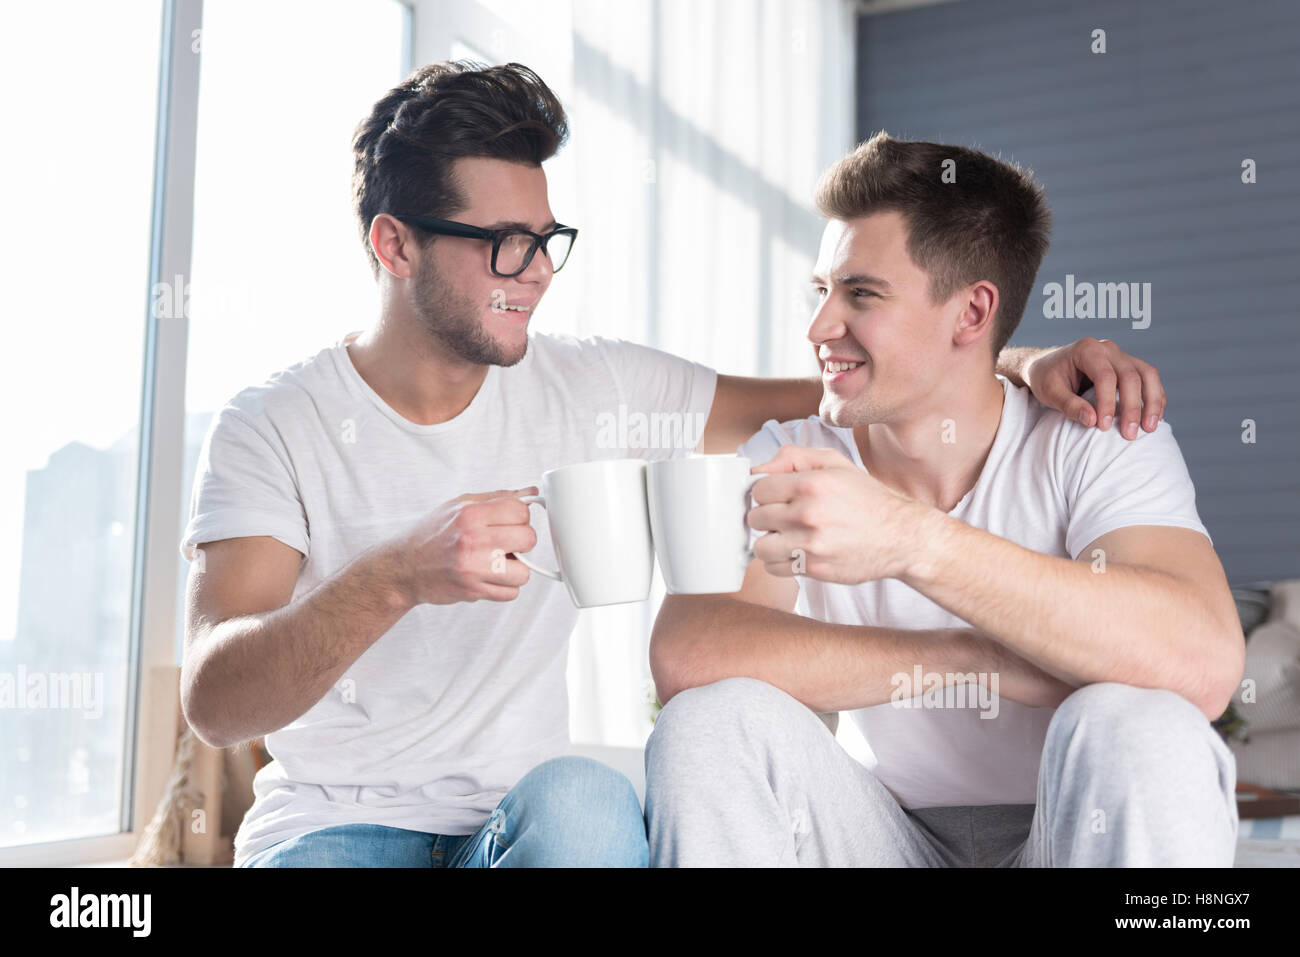 Homosexual couple having a hot drink together. Stock Photo